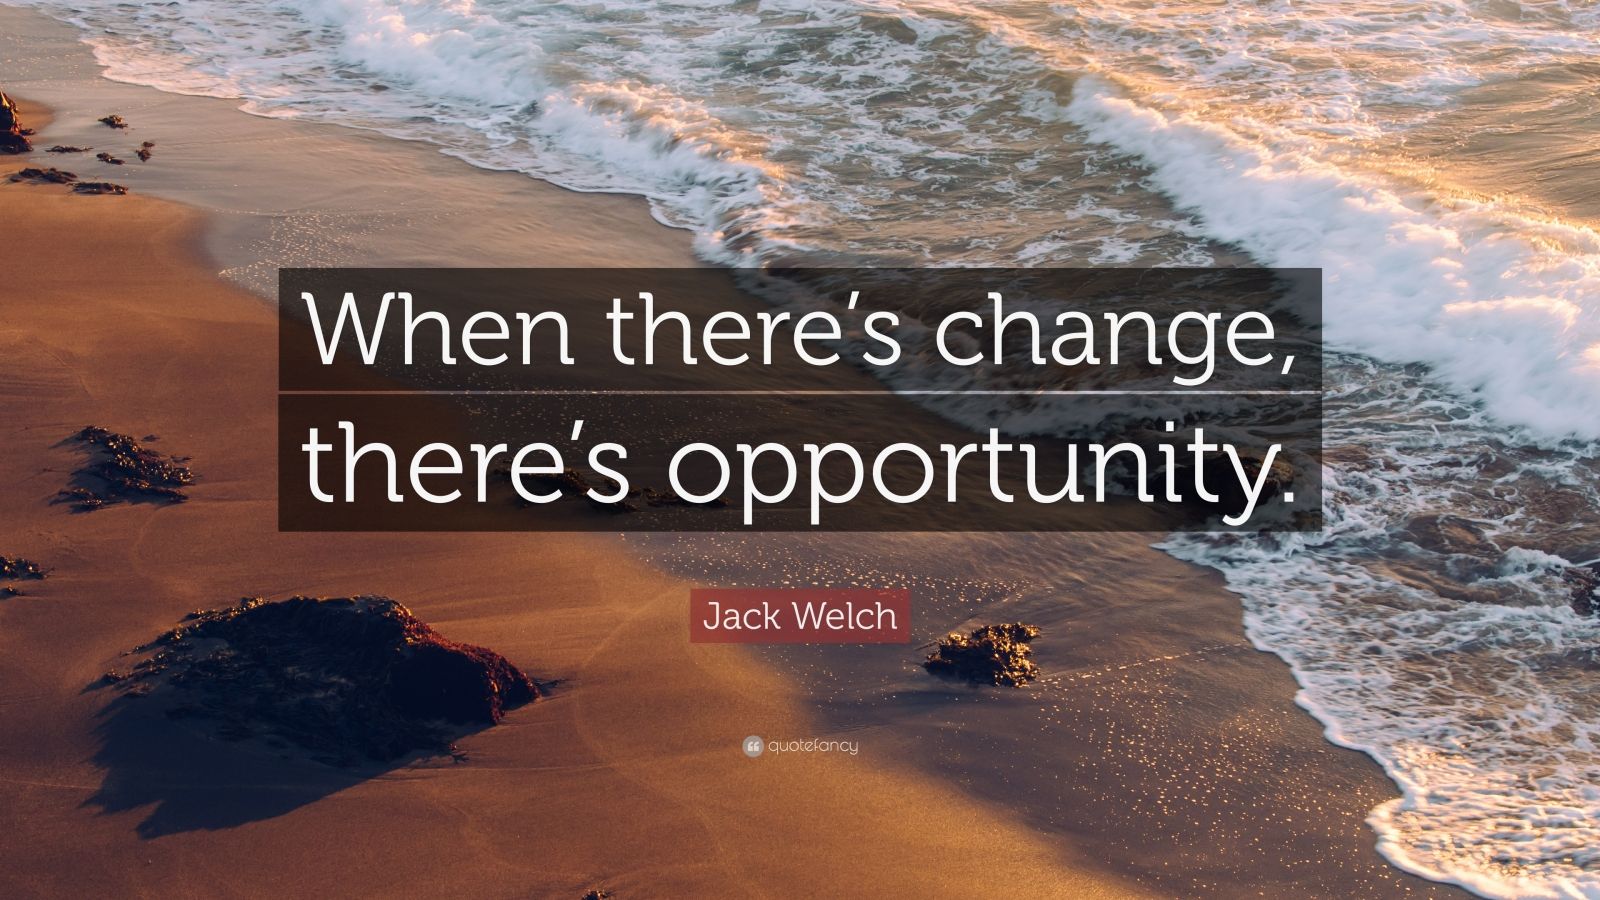 Jack Welch Quote: “When there’s change, there’s opportunity.” (9 ...